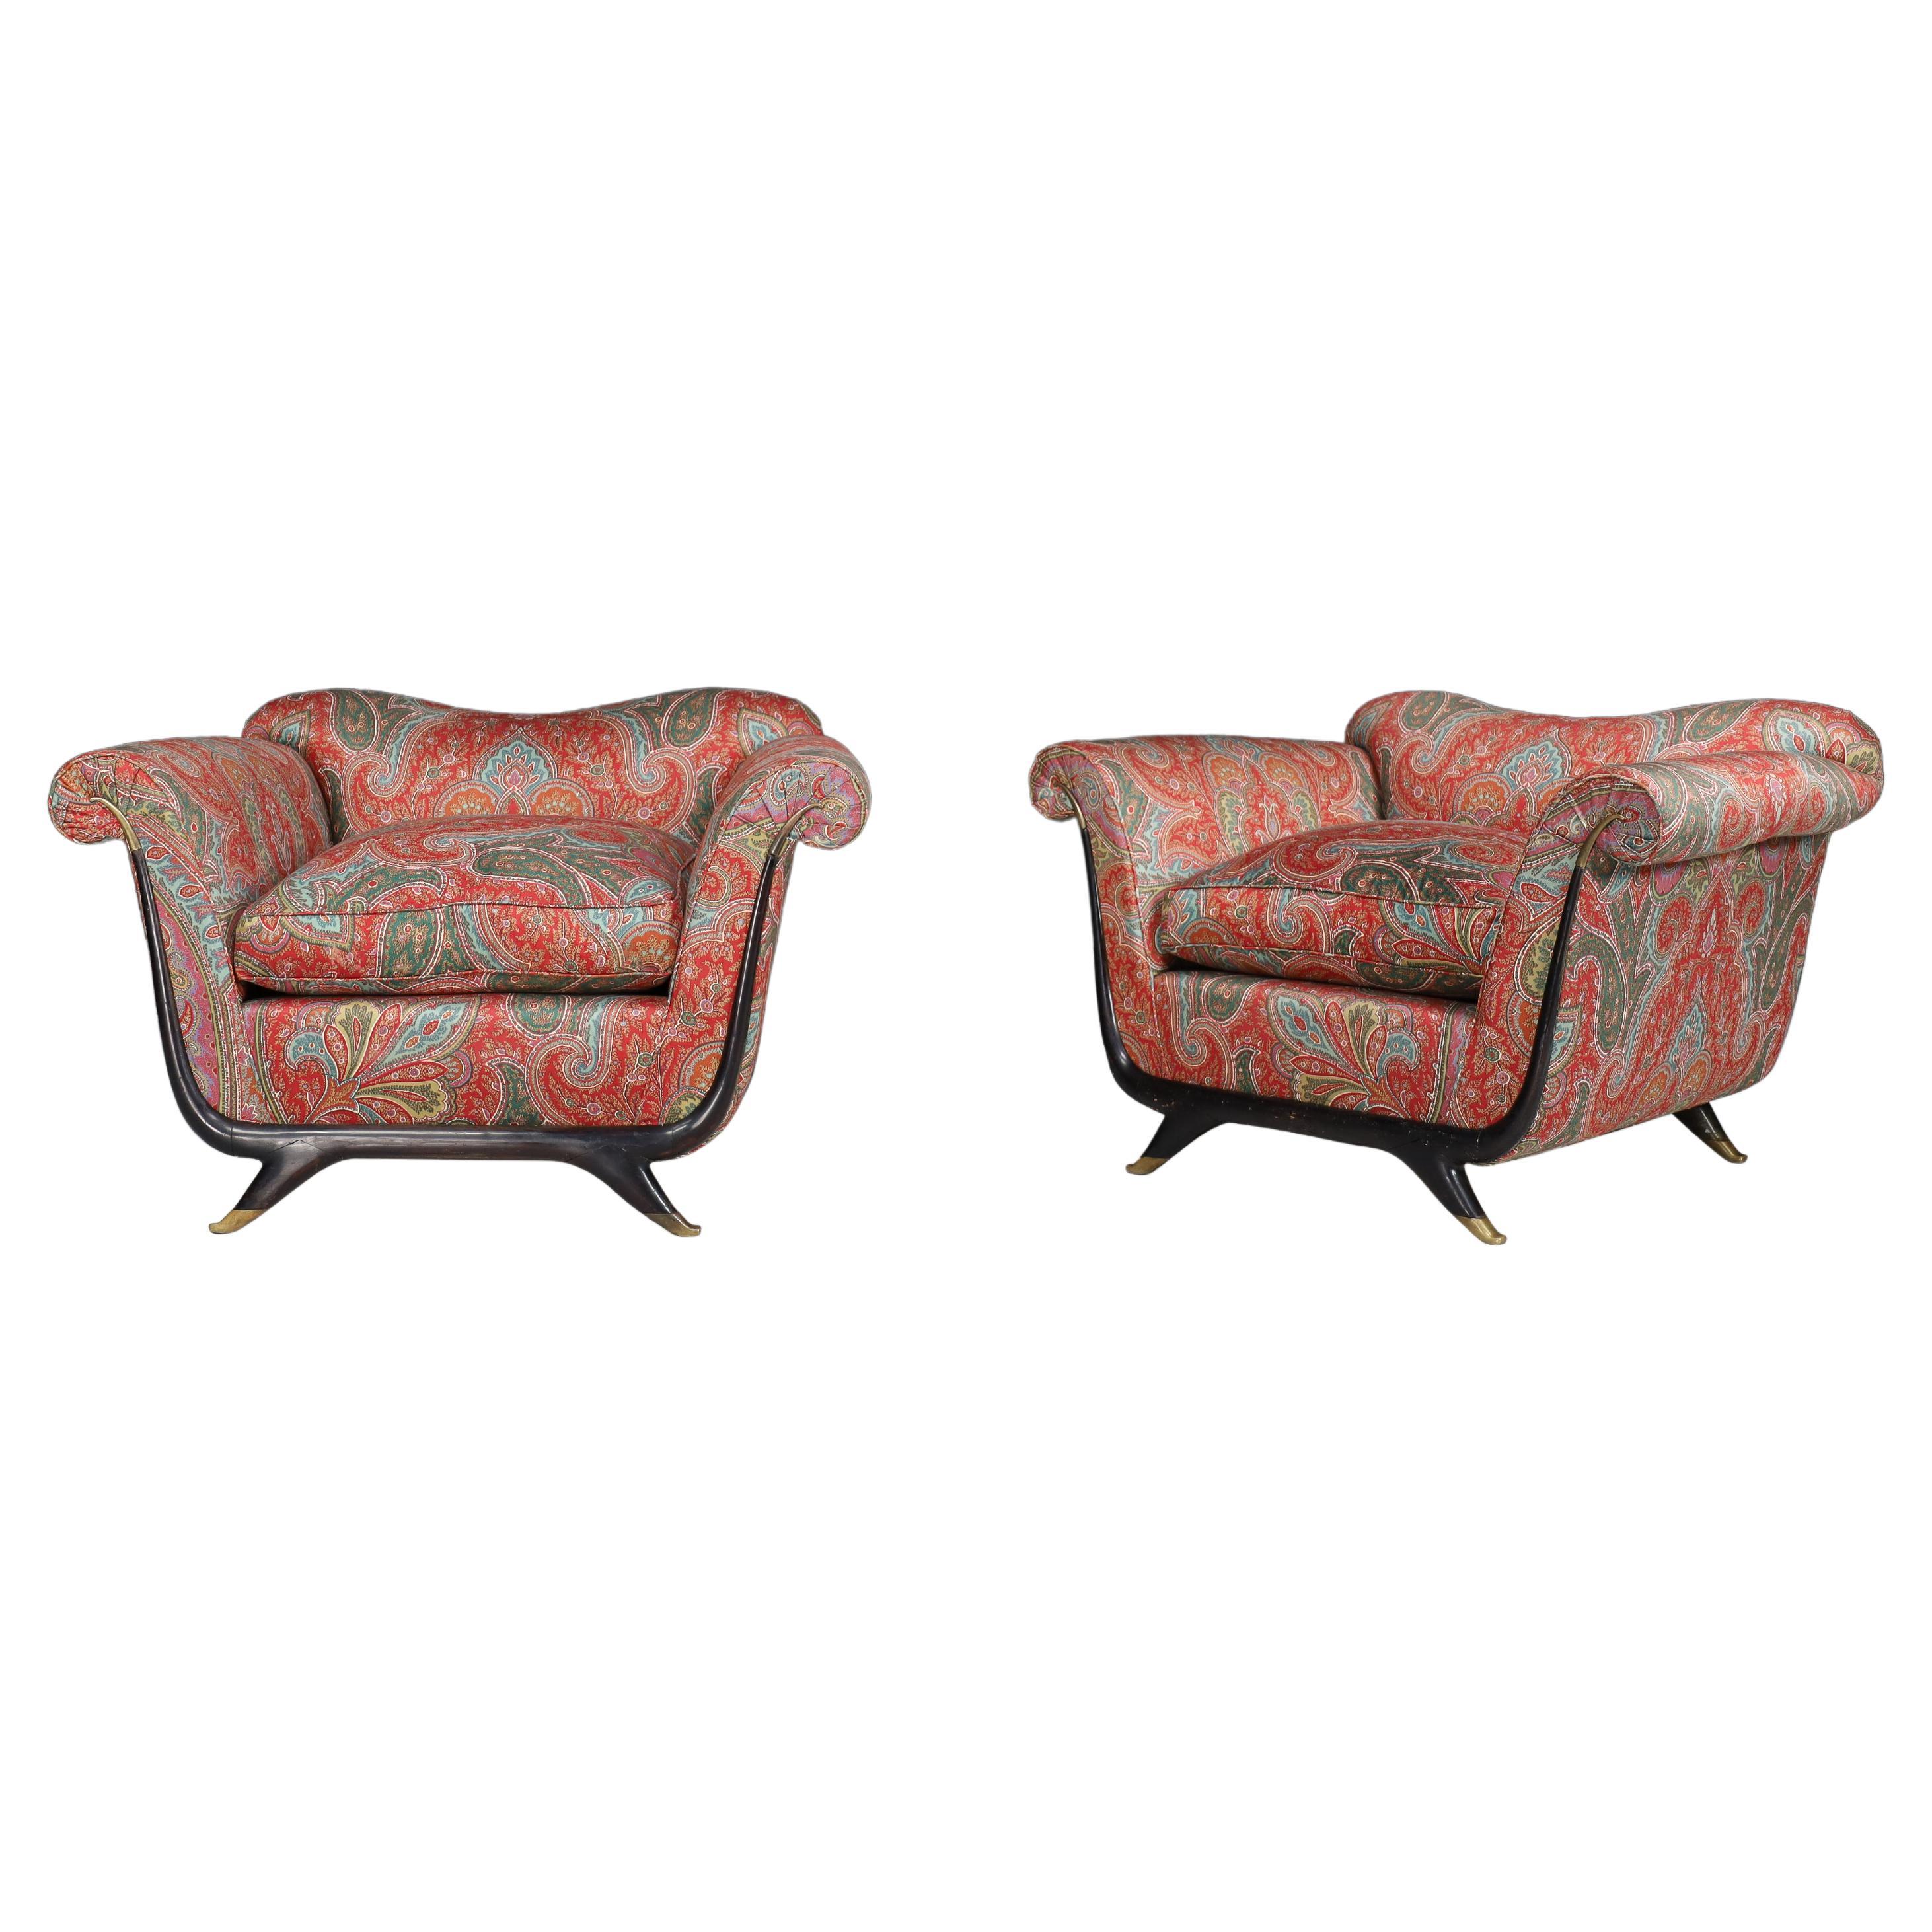 Guglielmo Ulrich Lounge Chairs in Walnut, Fabric, and Brass, Italy, 1930s 